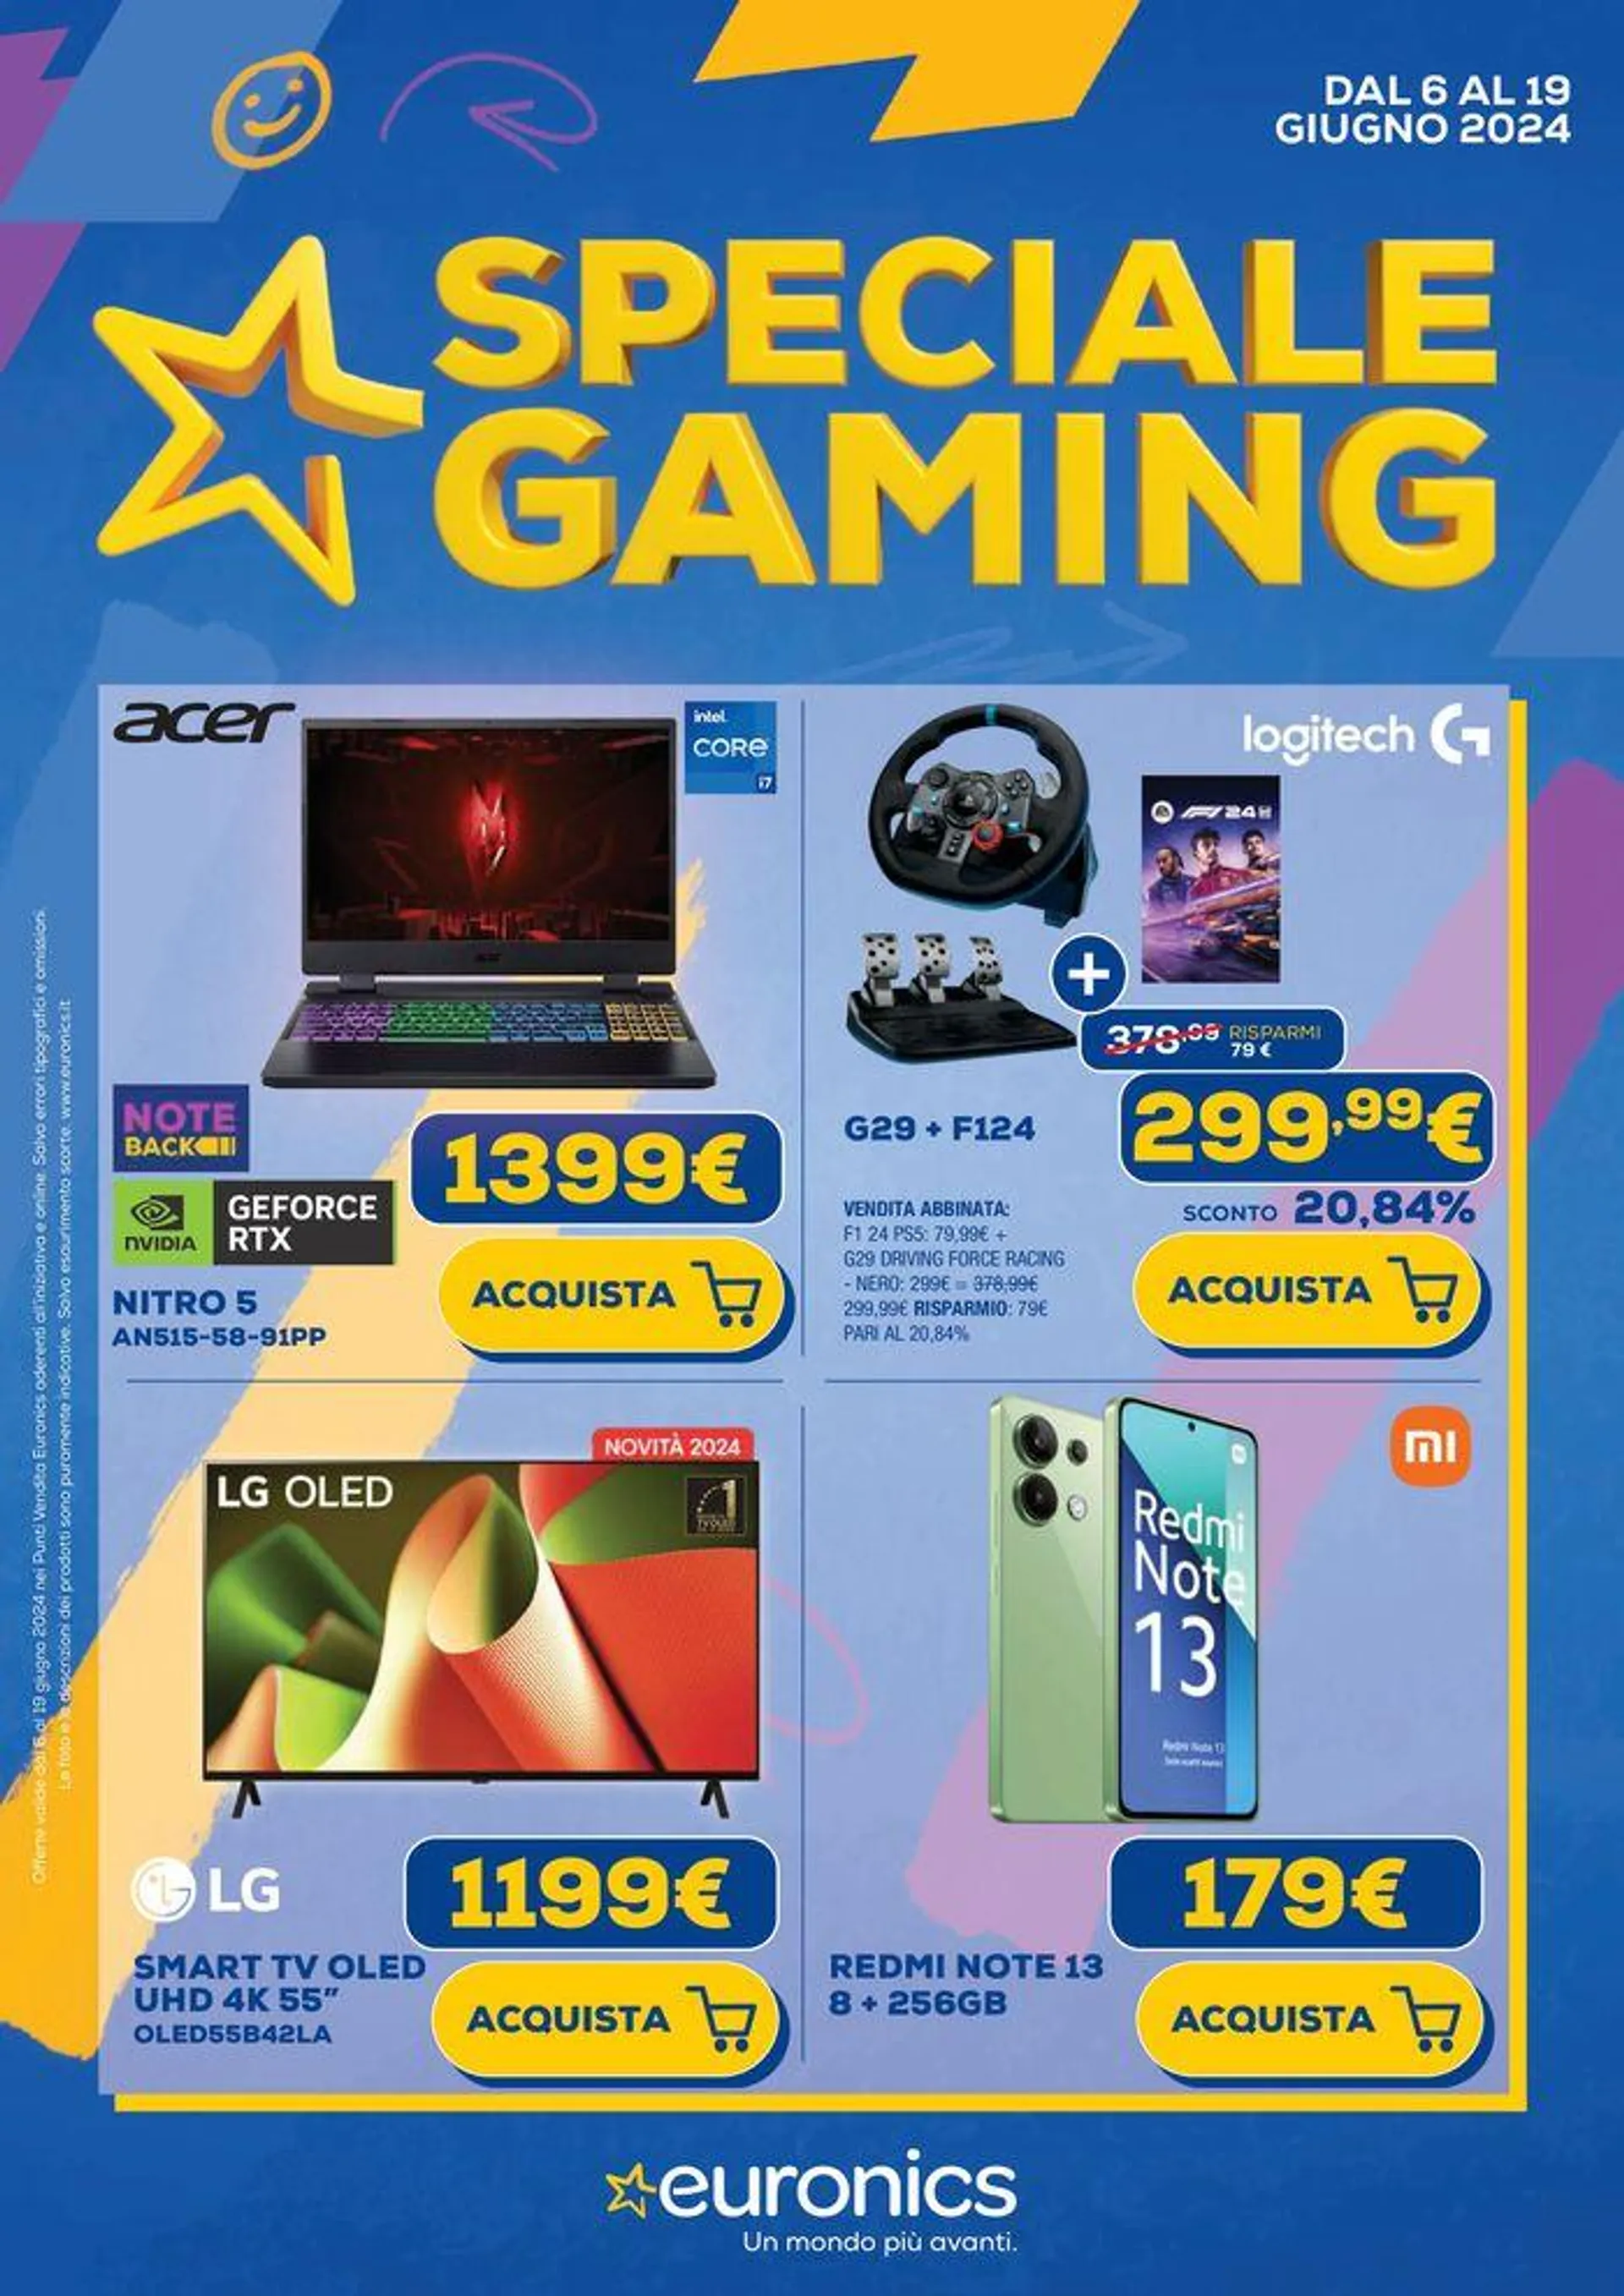 Speciale Gaming - 1